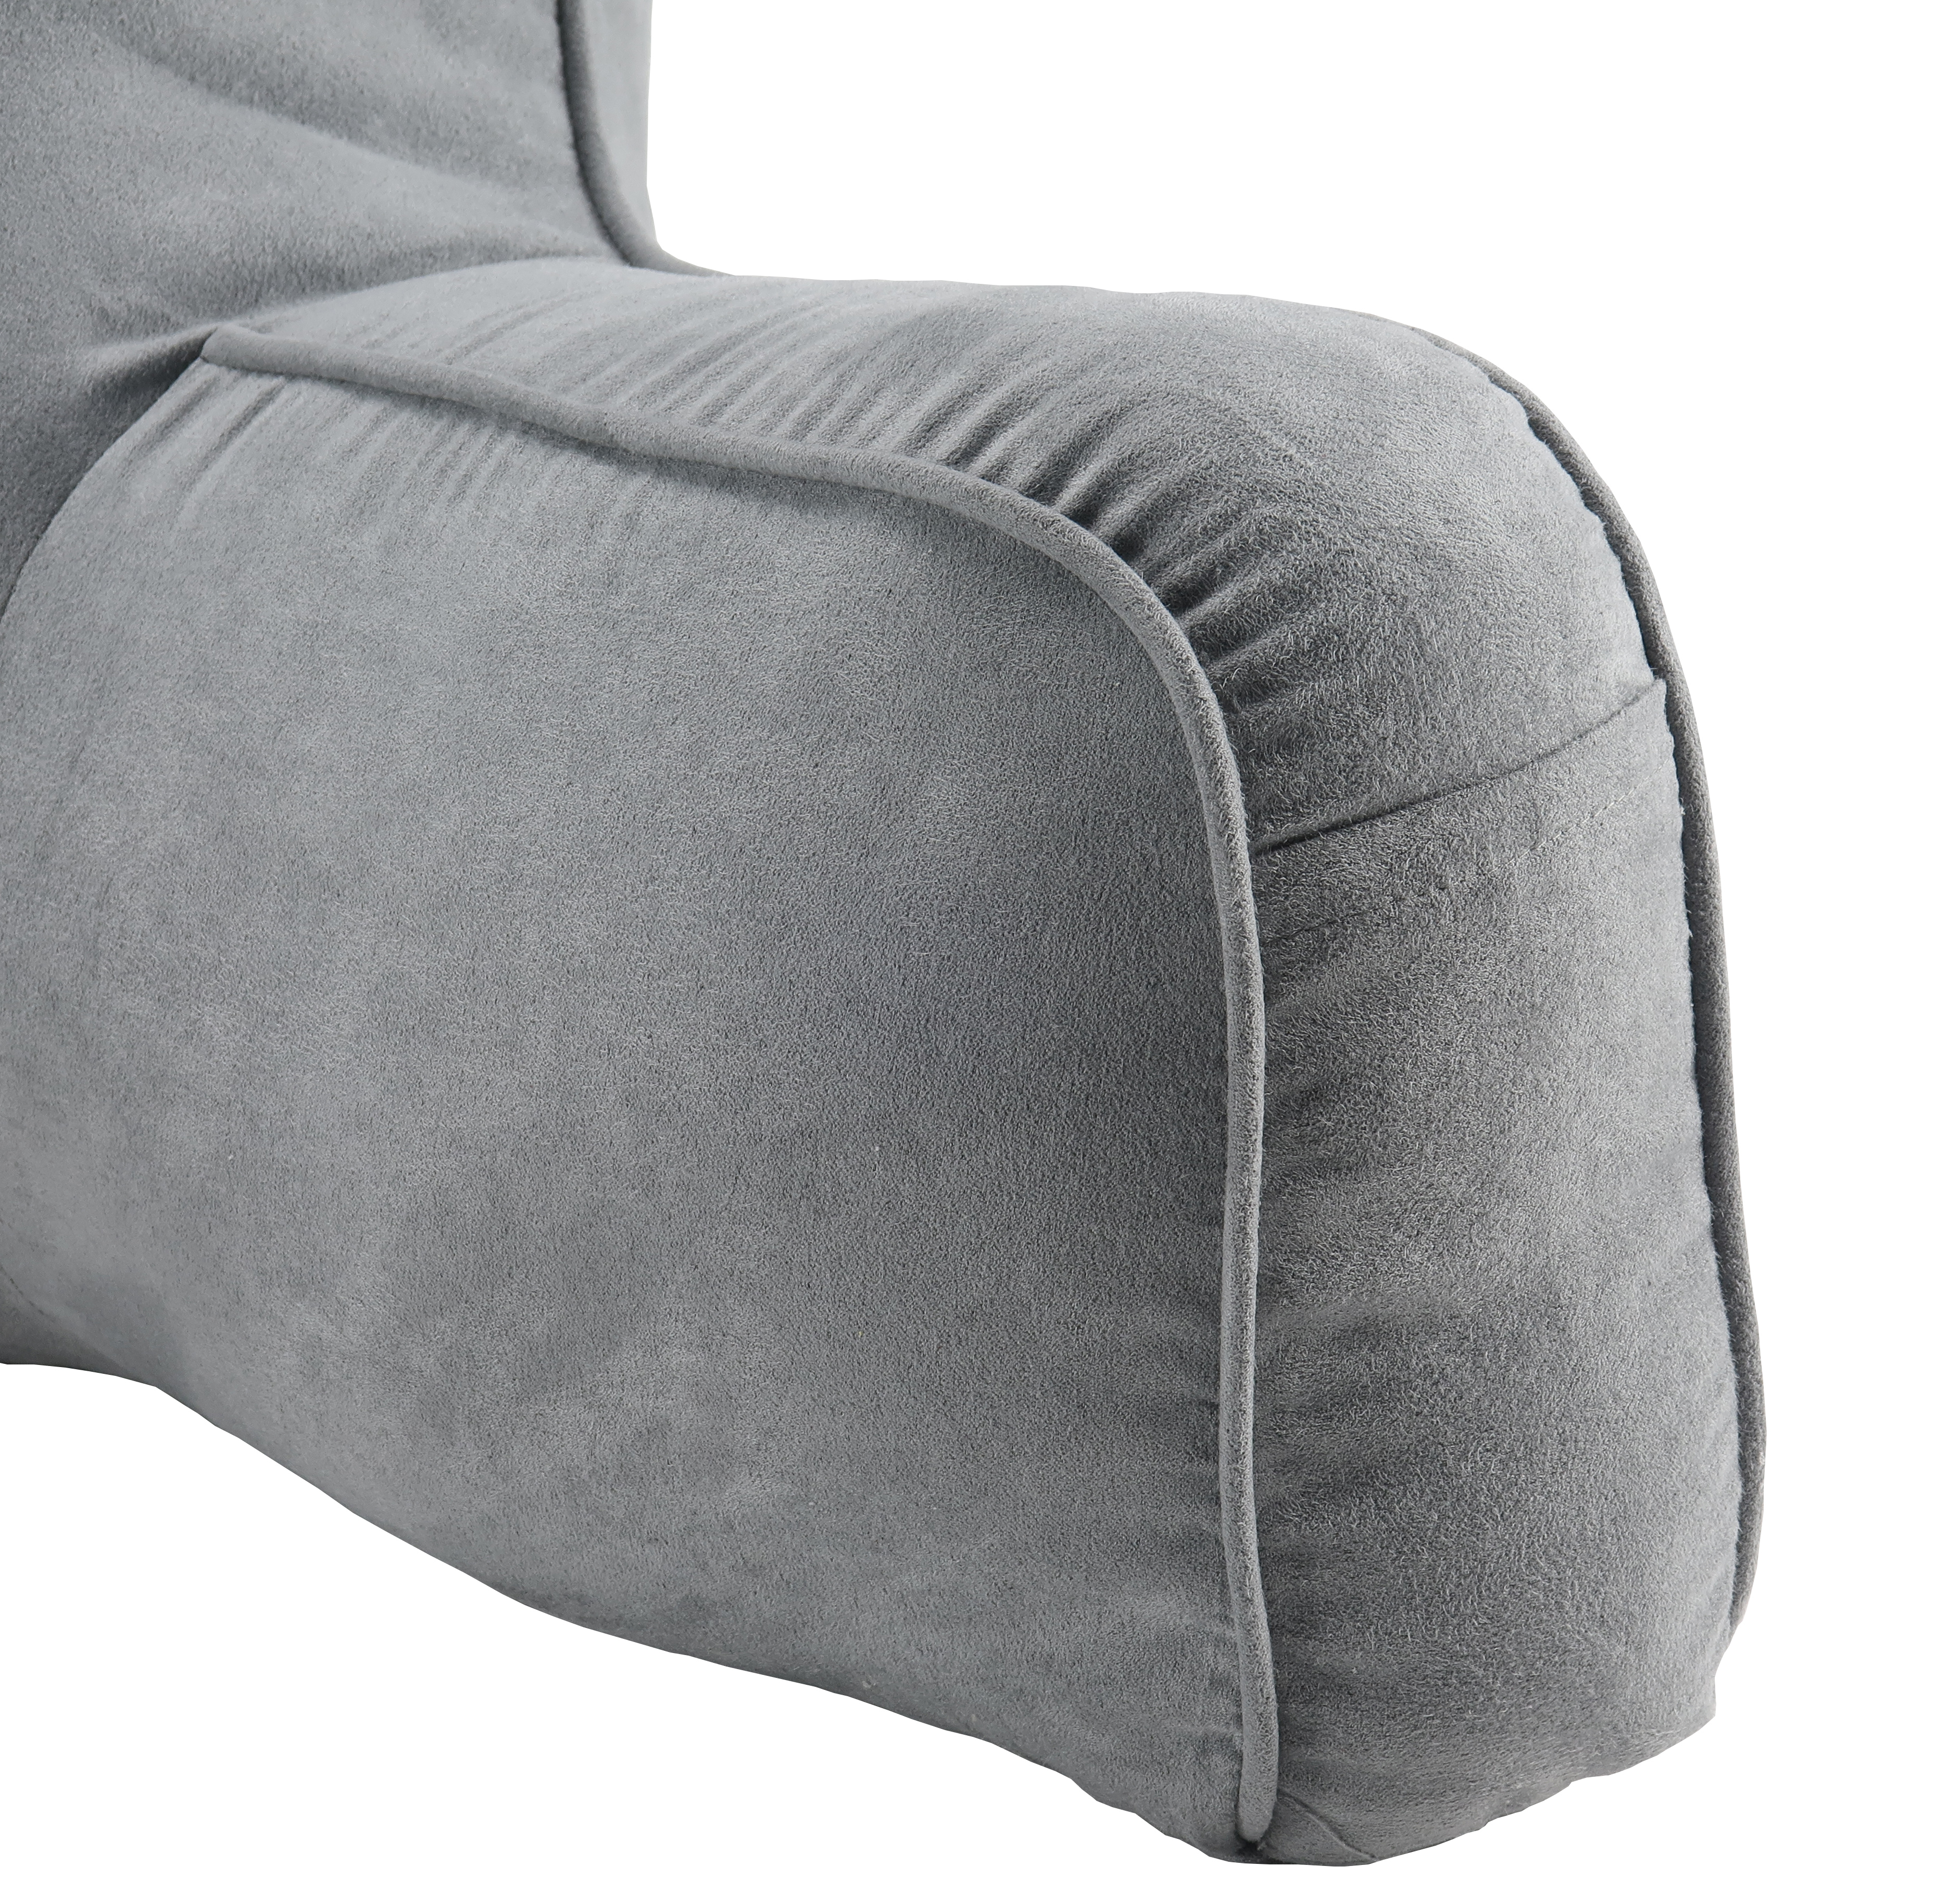 Elements Gray Solid Print Polyester Bed Rest Pillow - image 3 of 5